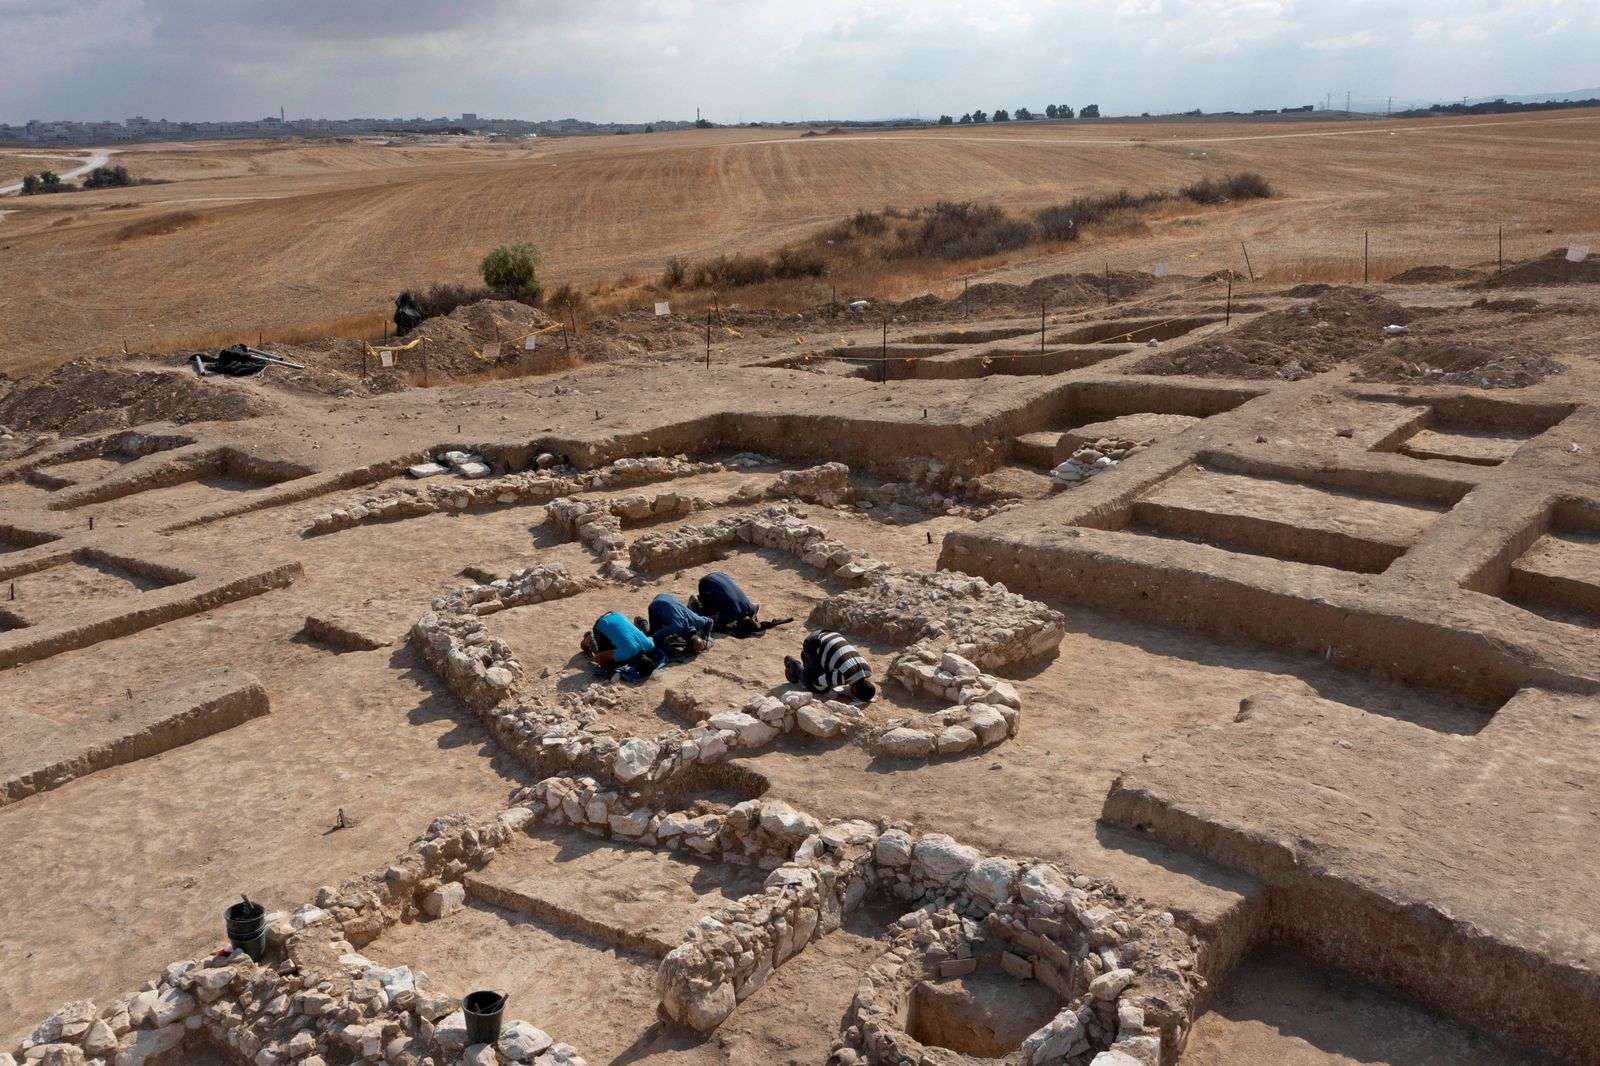 In Israeli Desert, Archaeologists Find One of the Oldest Known Mosques